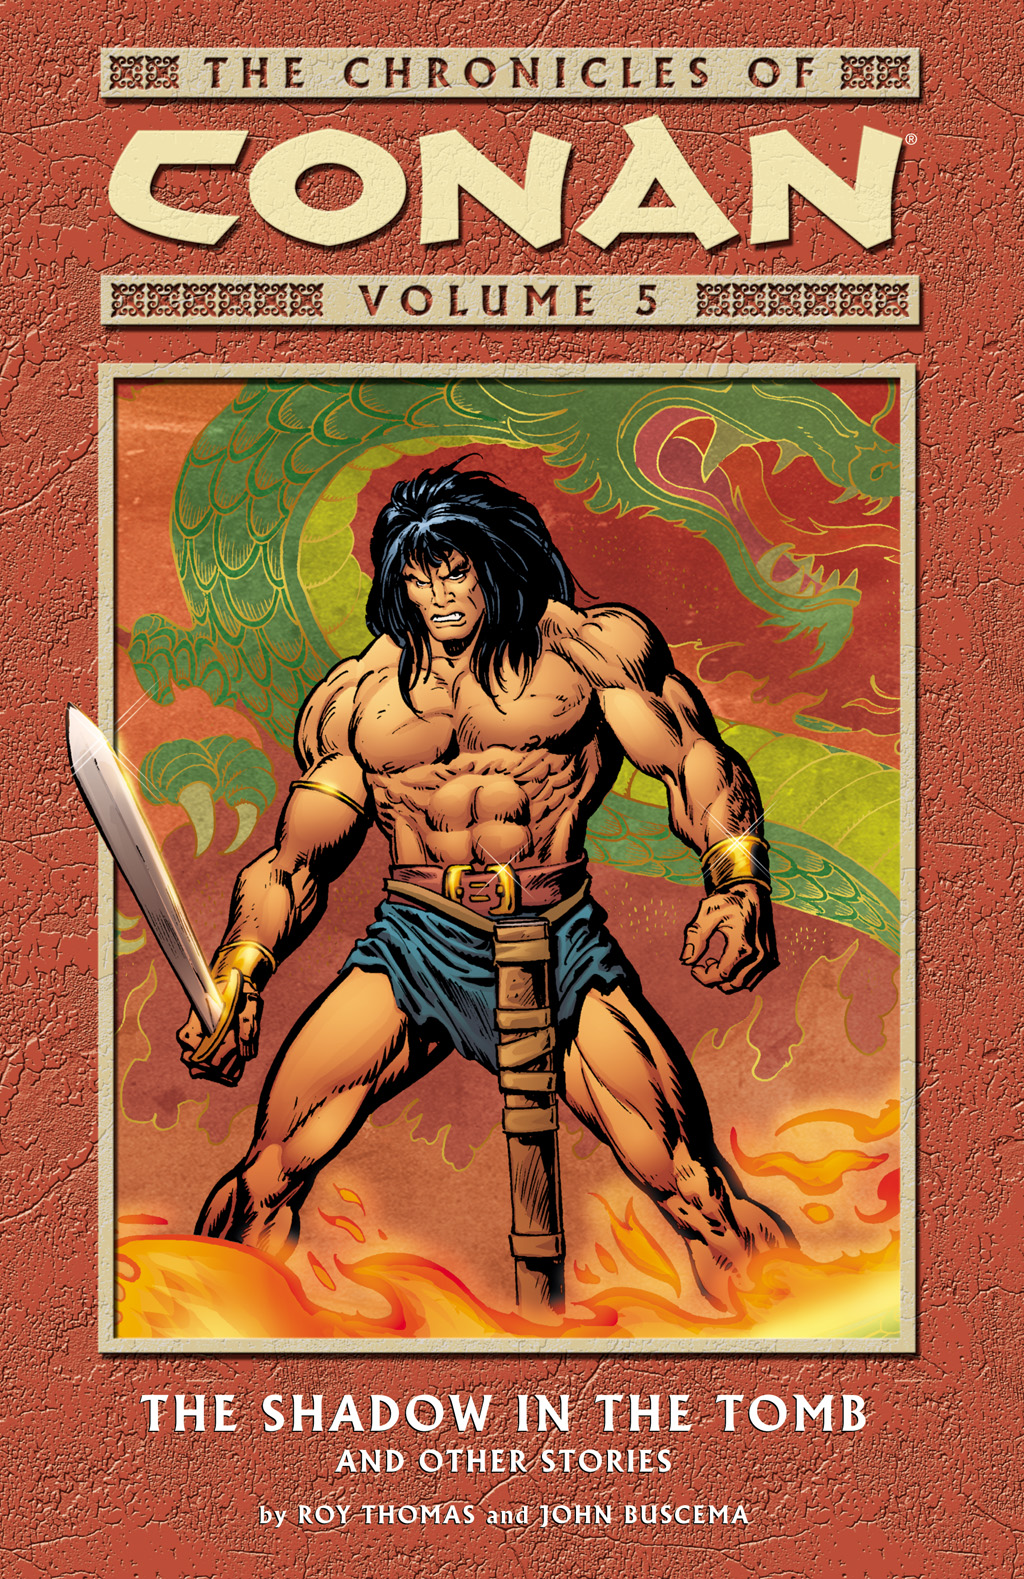 Read online The Chronicles of Conan comic -  Issue # TPB 5 (Part 1) - 1